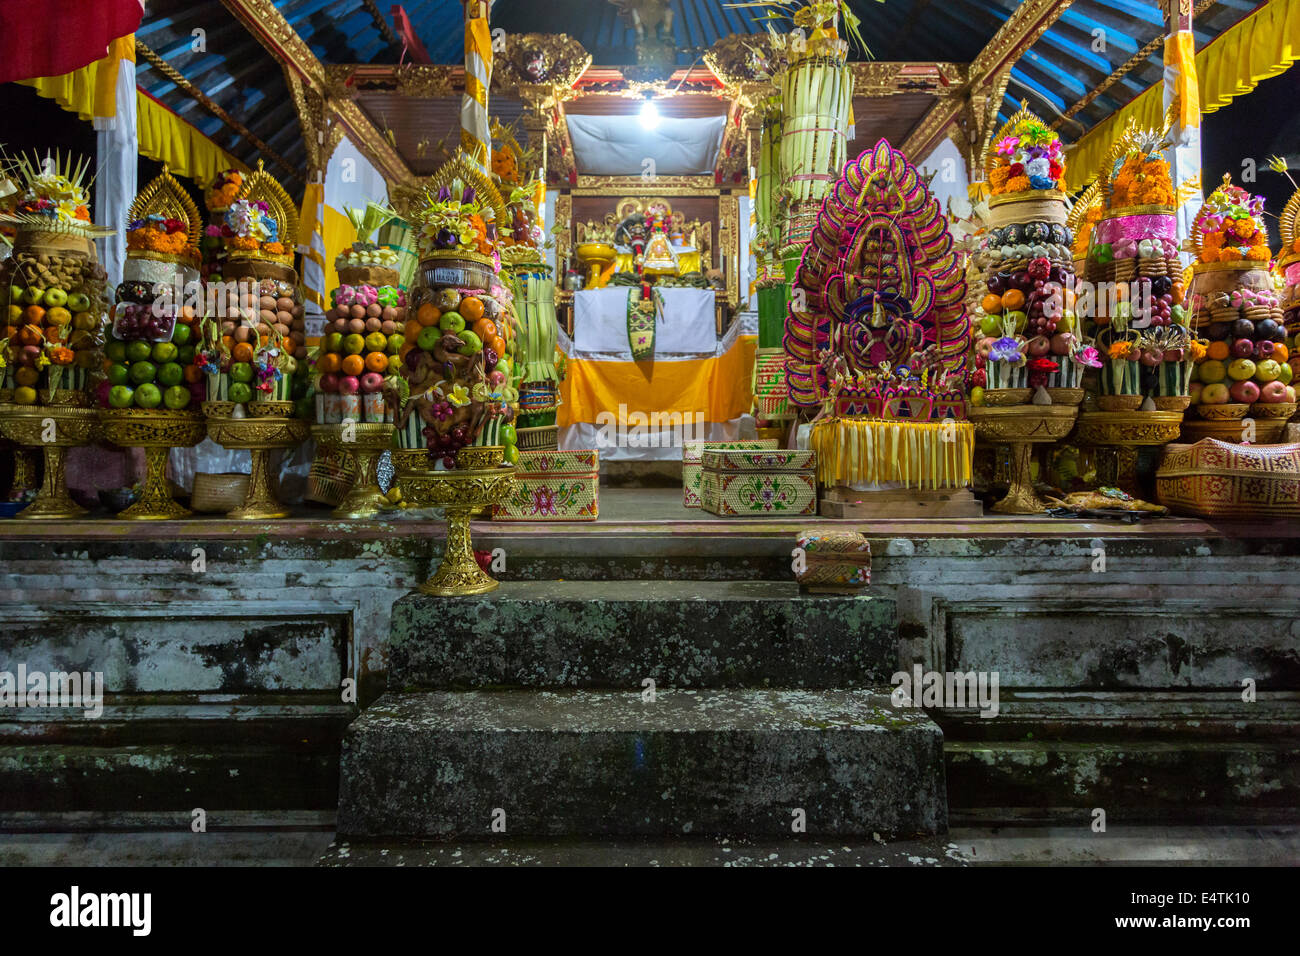 Bali, Indonesia.  Temple Offerings of Fruit, Eggs, and Sweets in Hope of a Good Rice Harvest, Pura Dalem Hindu Temple, Dlod Blun Stock Photo